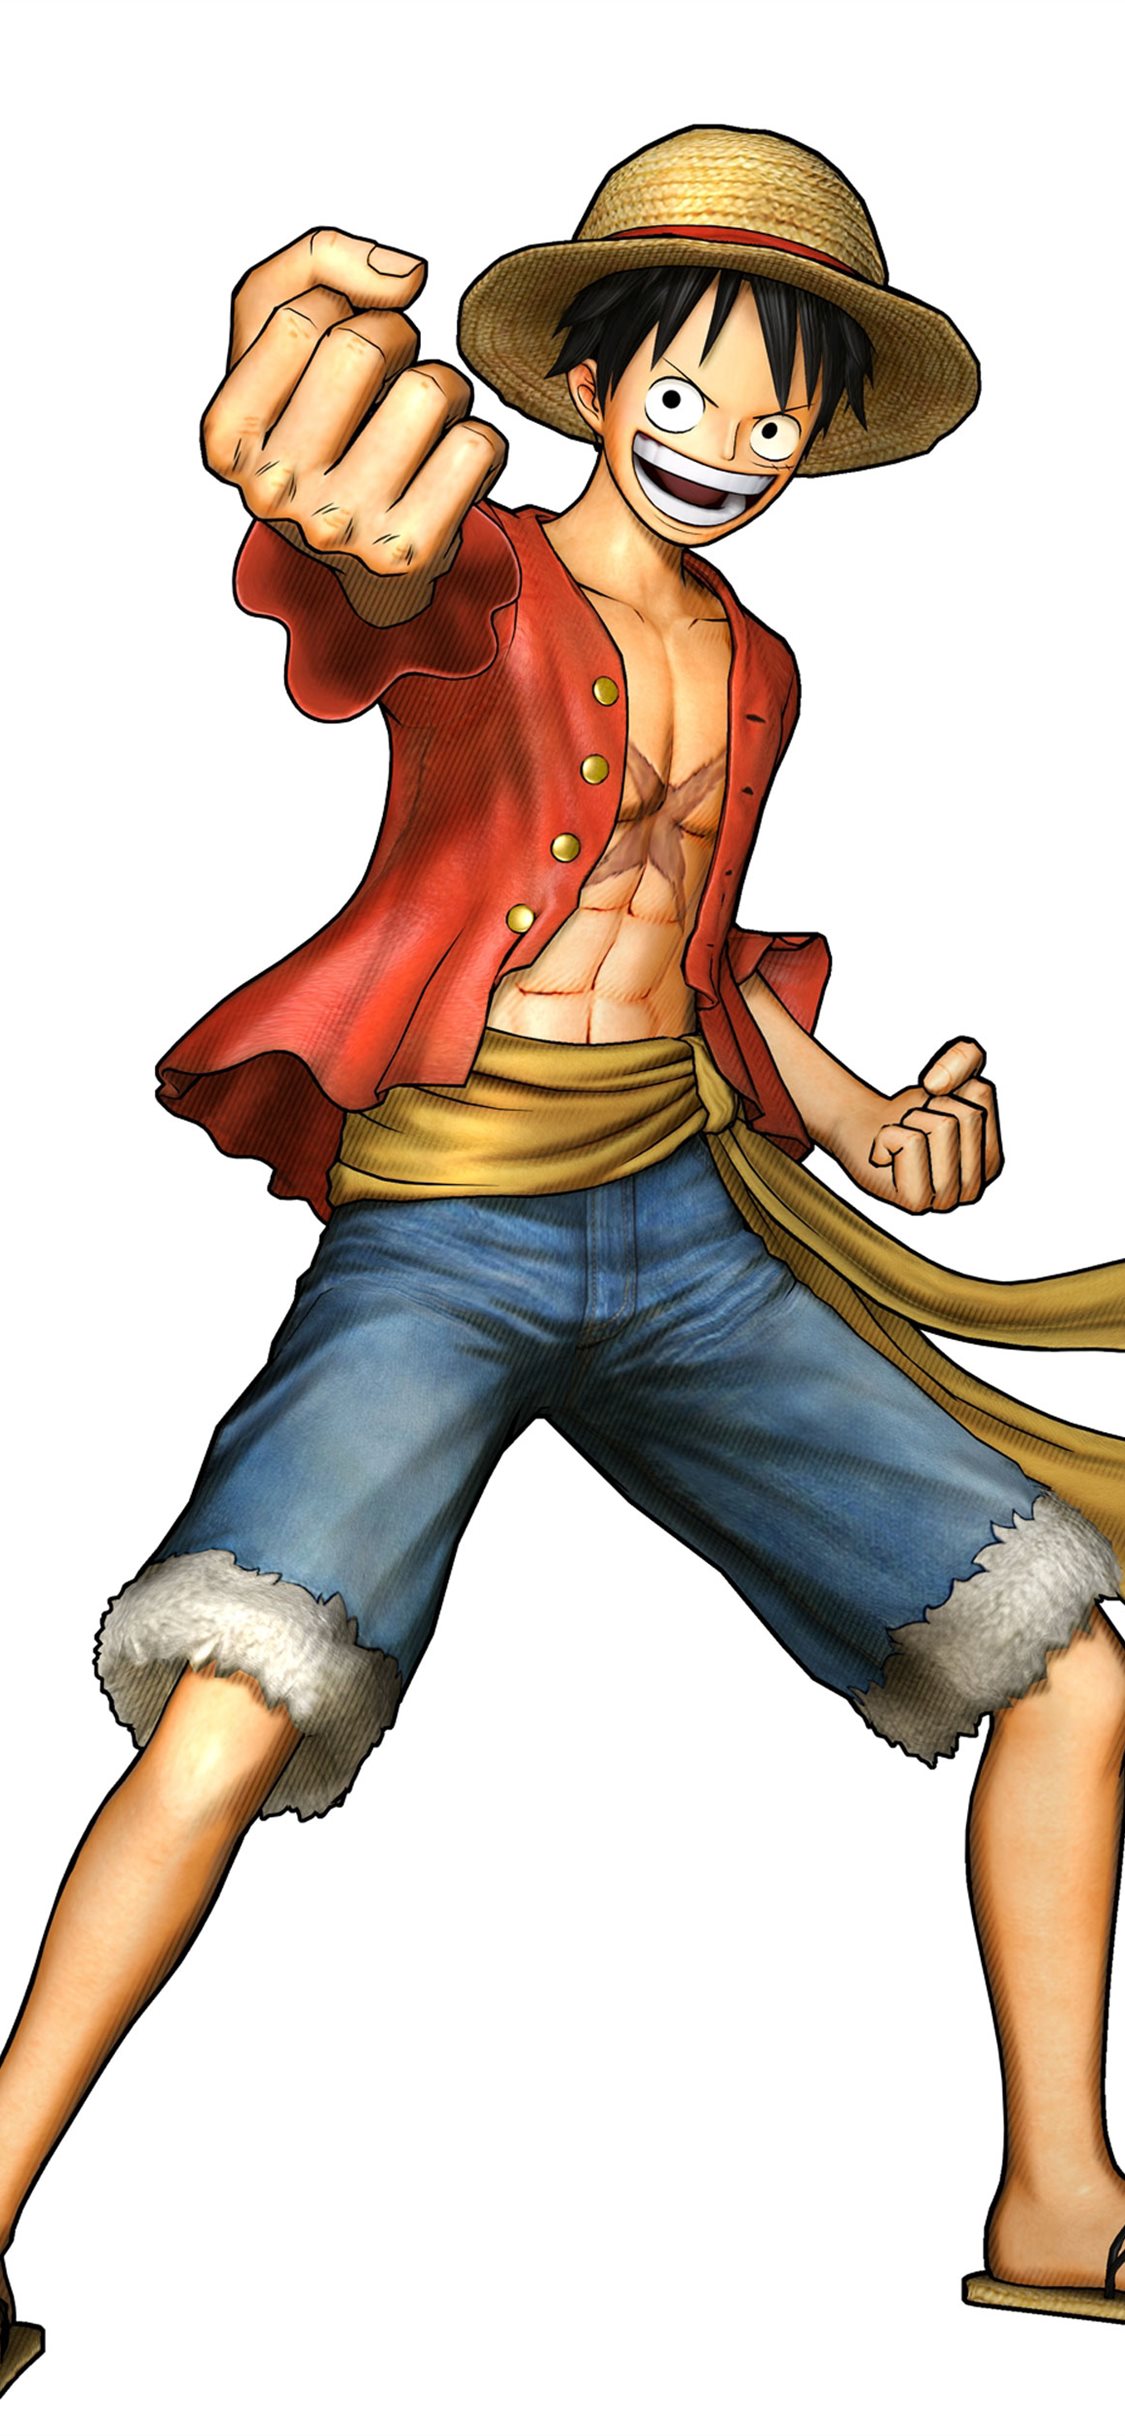 Download Monkey D Luffy wallpapers for mobile phone free Monkey D Luffy  HD pictures